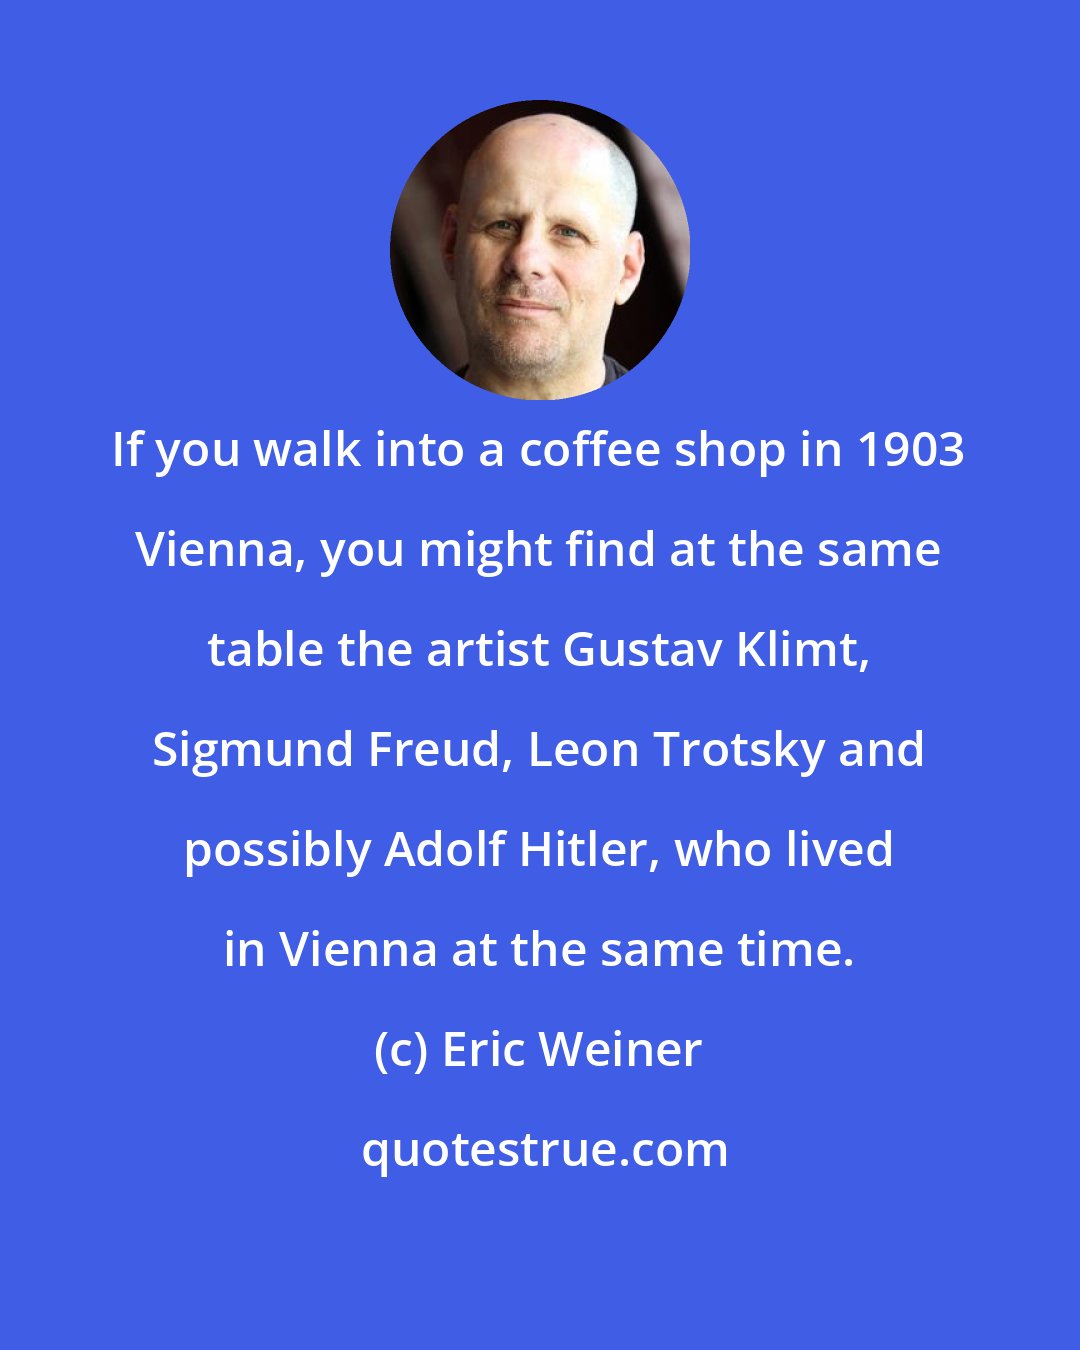 Eric Weiner: If you walk into a coffee shop in 1903 Vienna, you might find at the same table the artist Gustav Klimt, Sigmund Freud, Leon Trotsky and possibly Adolf Hitler, who lived in Vienna at the same time.